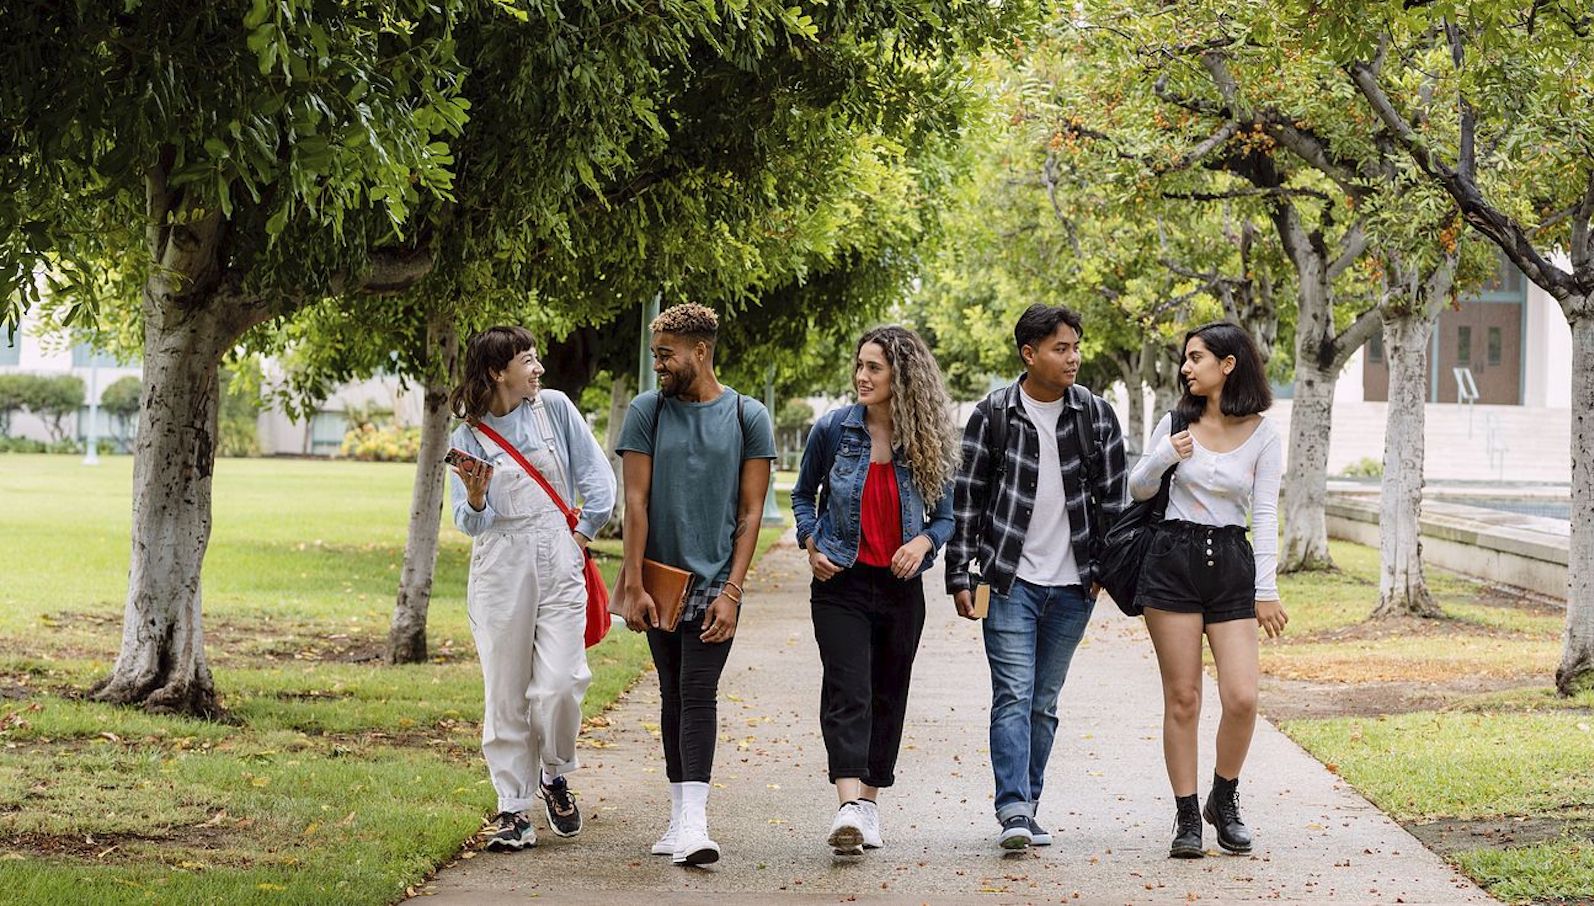 Five young people in their late teens or early twenties walking side by side on a concrete path among treets on a college campus